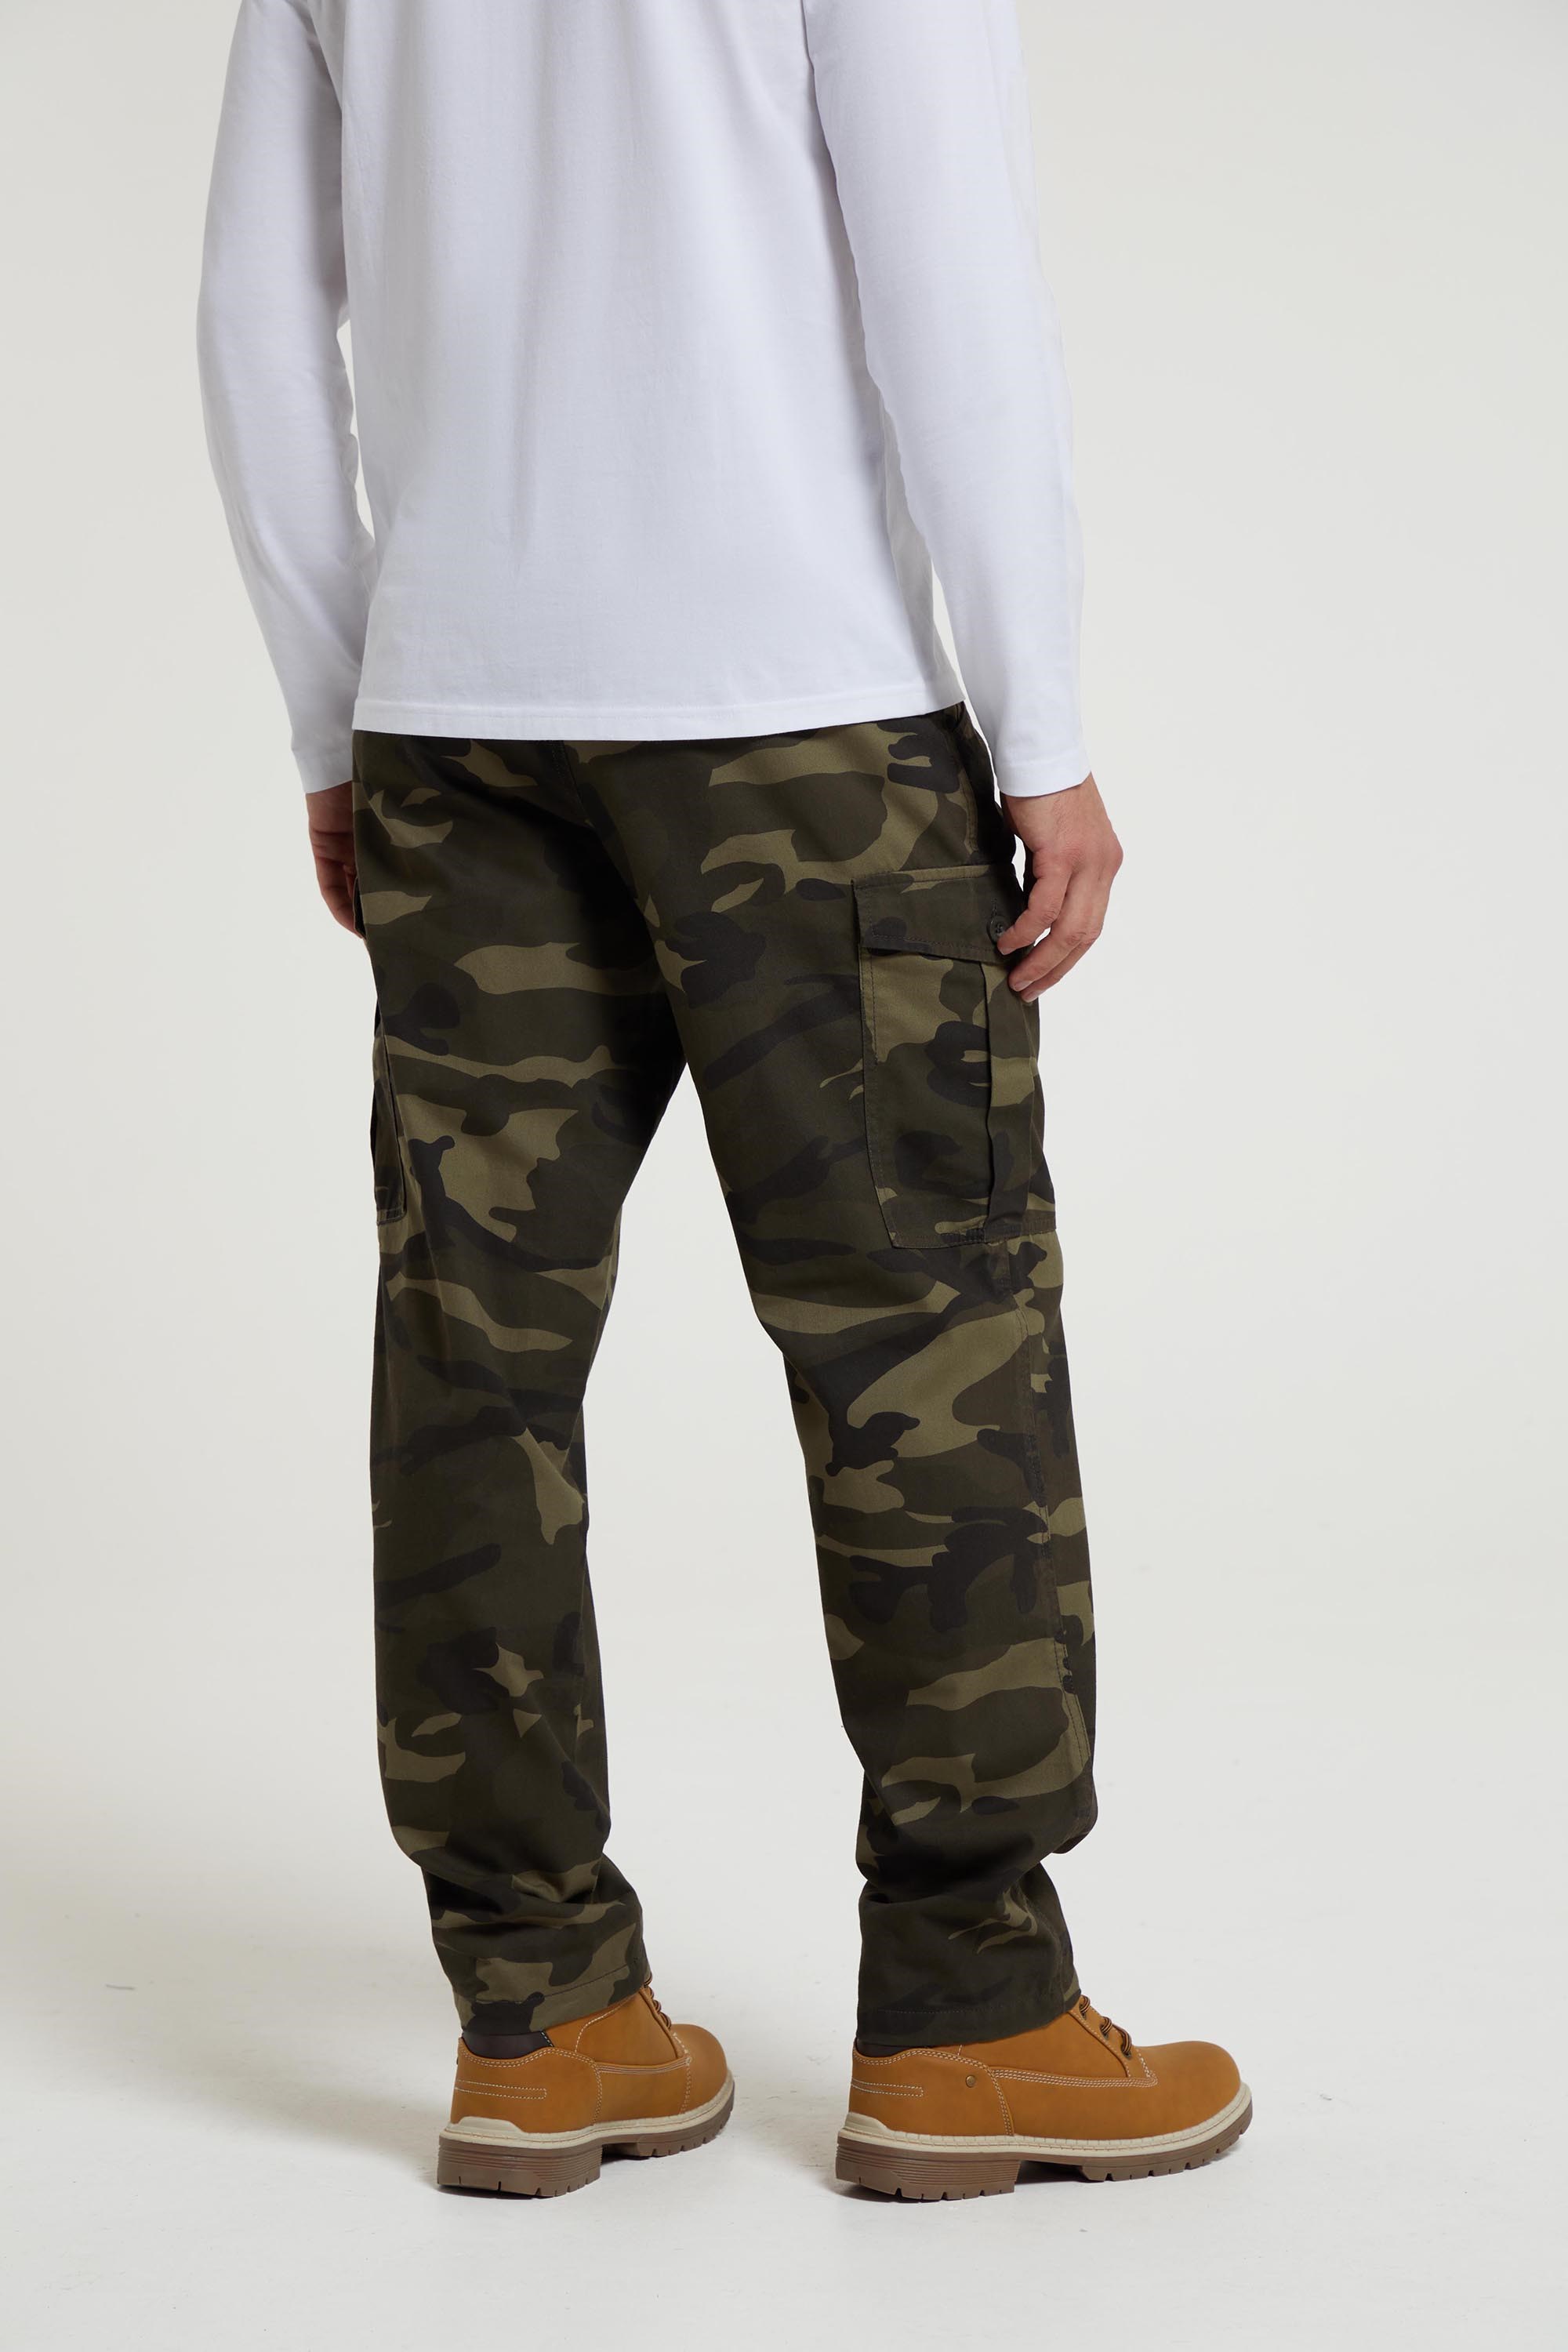 Men's Cargo Pants Cargo Trousers Trousers Camo Pants Leg Drawstring 8  Pocket Print Camouflage Comfort Outdoor Daily Going out 100% Cotton Fashion  Streetwear Yellow camouflage Black 2024 - $29.99